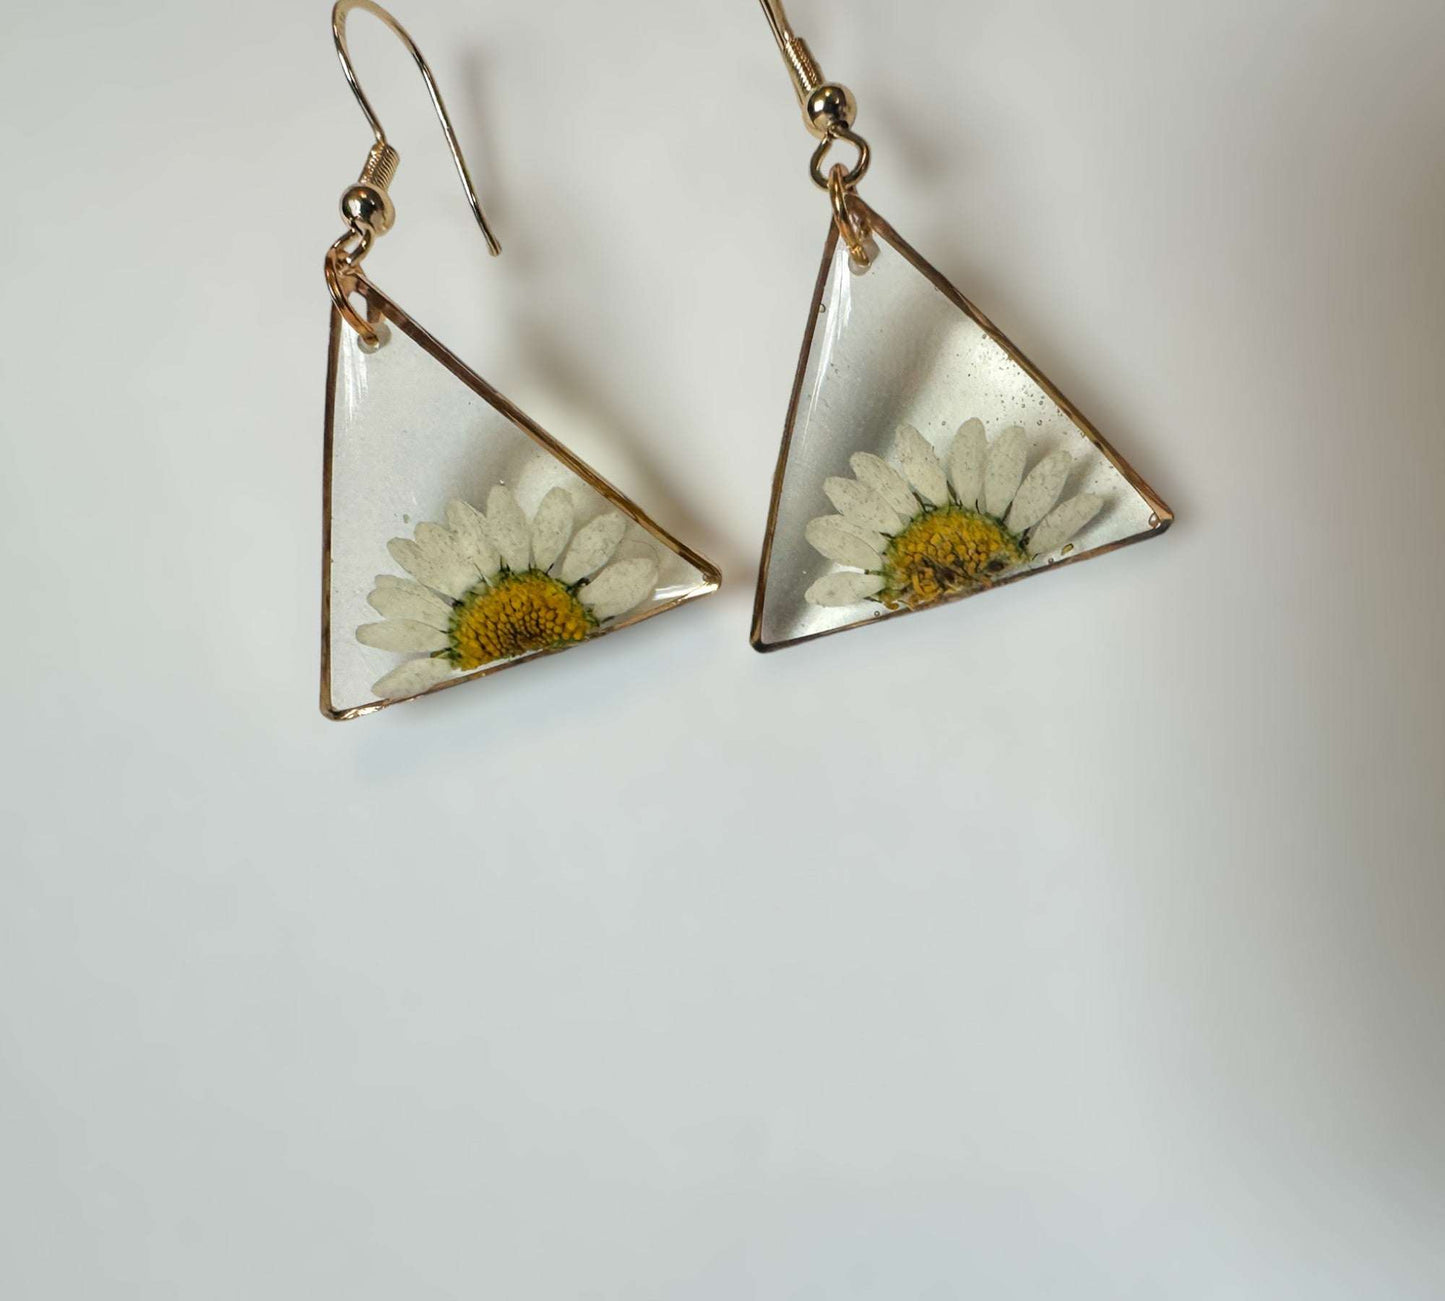 Daisy Dreams: Pressed Daisy Floral Earrings for Endless Charm